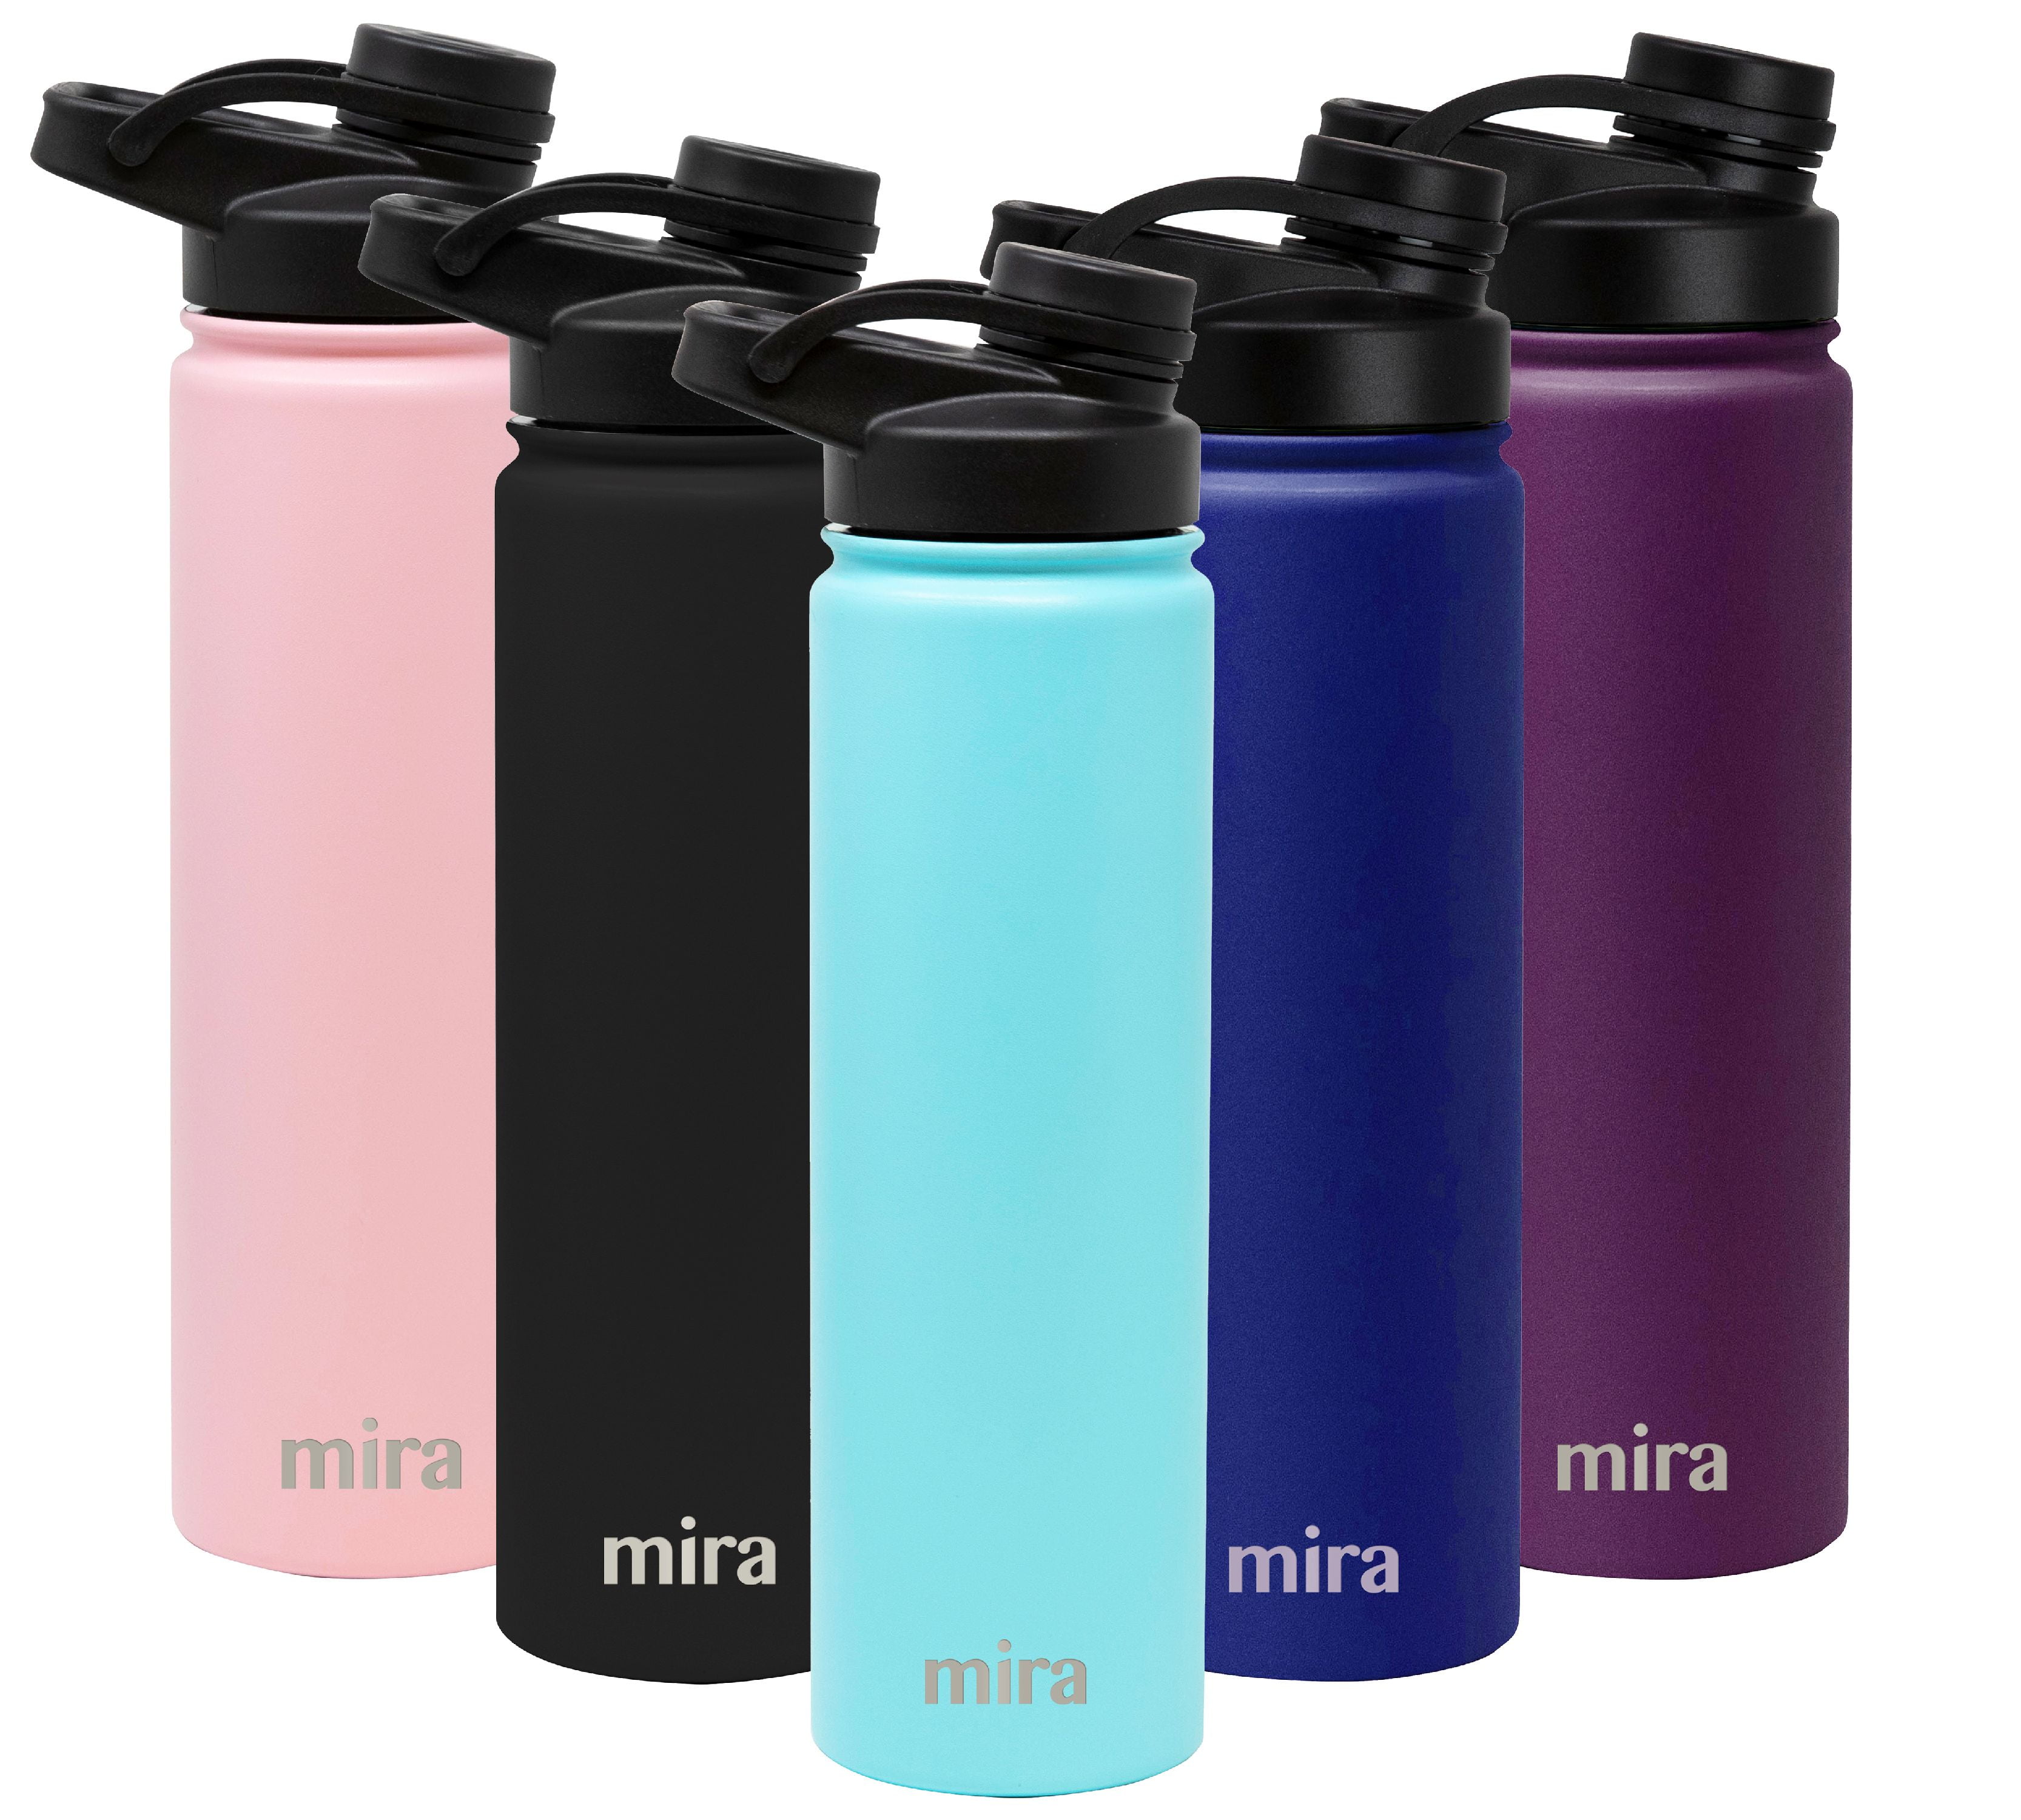 Mira 10 oz Insulated Small Thermos Flask Kids Vacuum Insulated Water Bottle Leak Proof & Spill Proof Taffy Pink